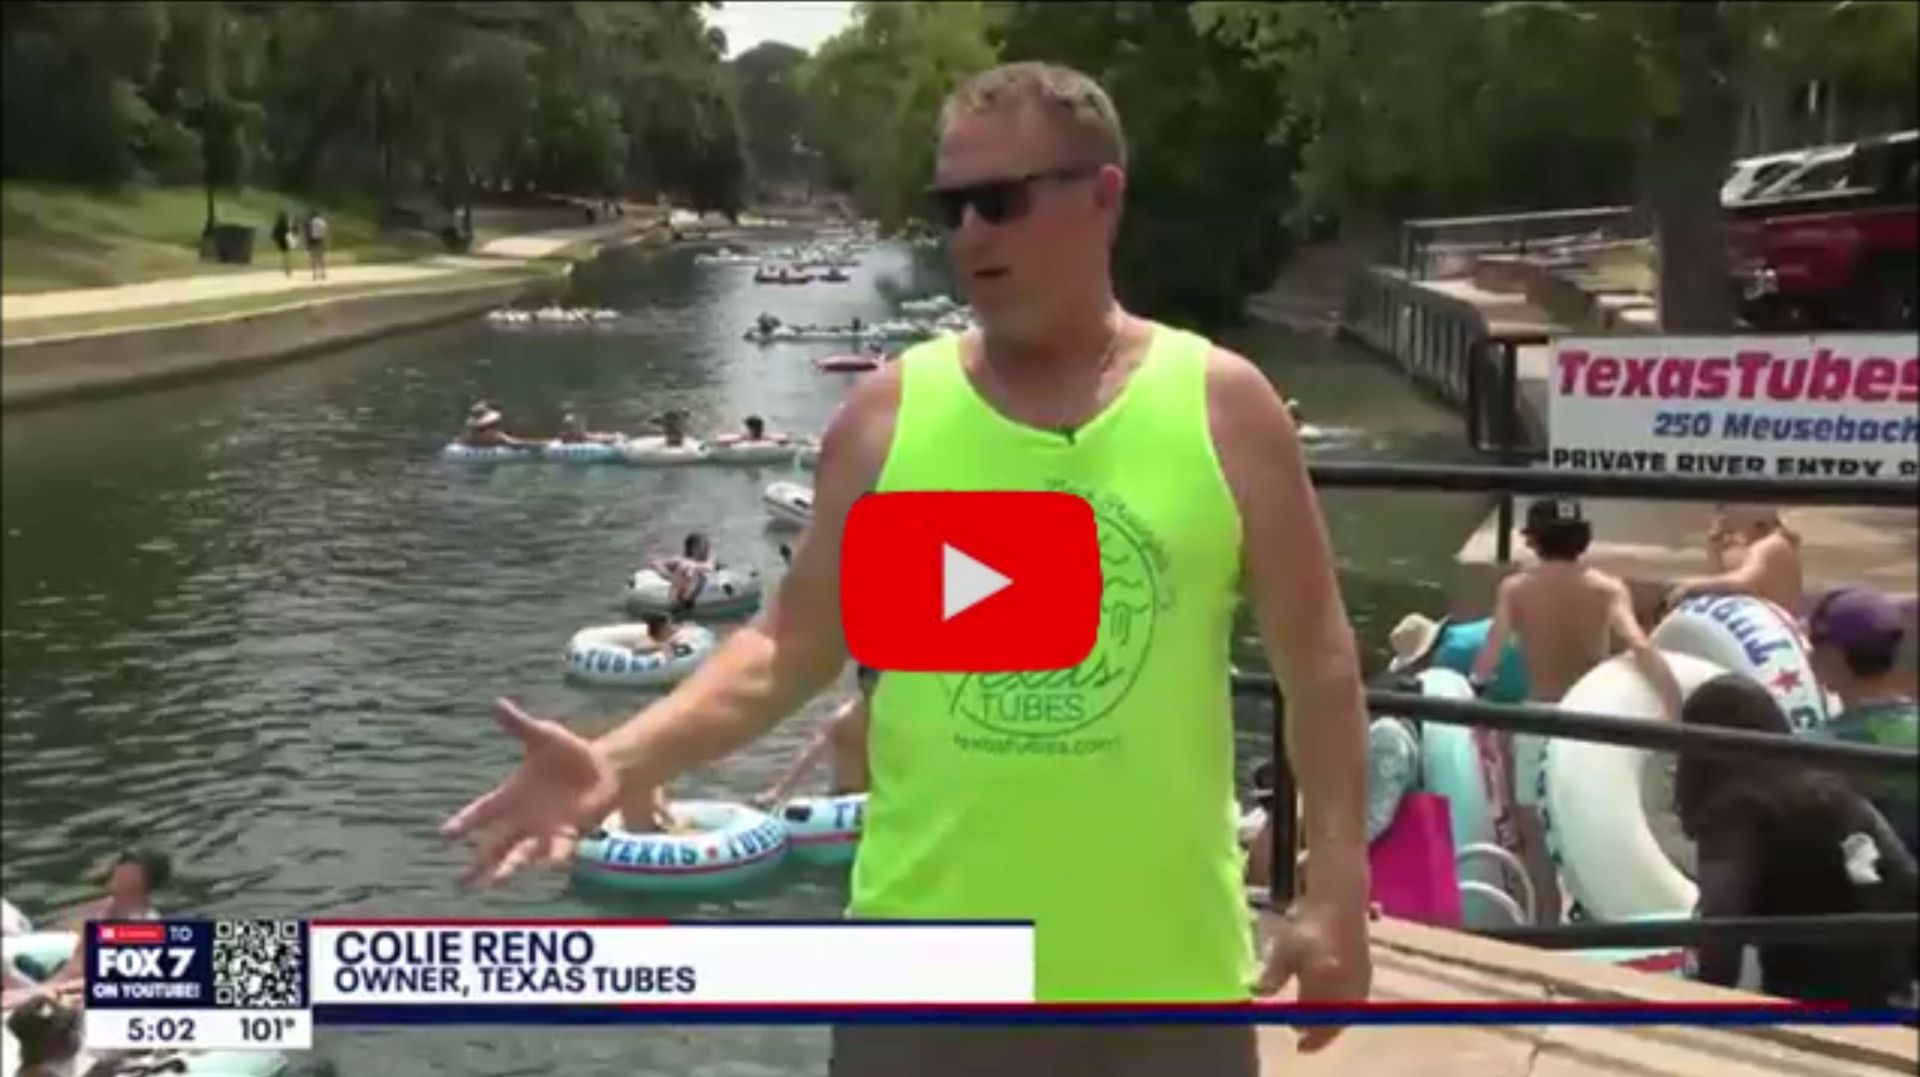 Colie Reno - owner of Texas Tubes being interviewed live on the Comal River by Carissa Lehmkuhl from Fox 7 Austin